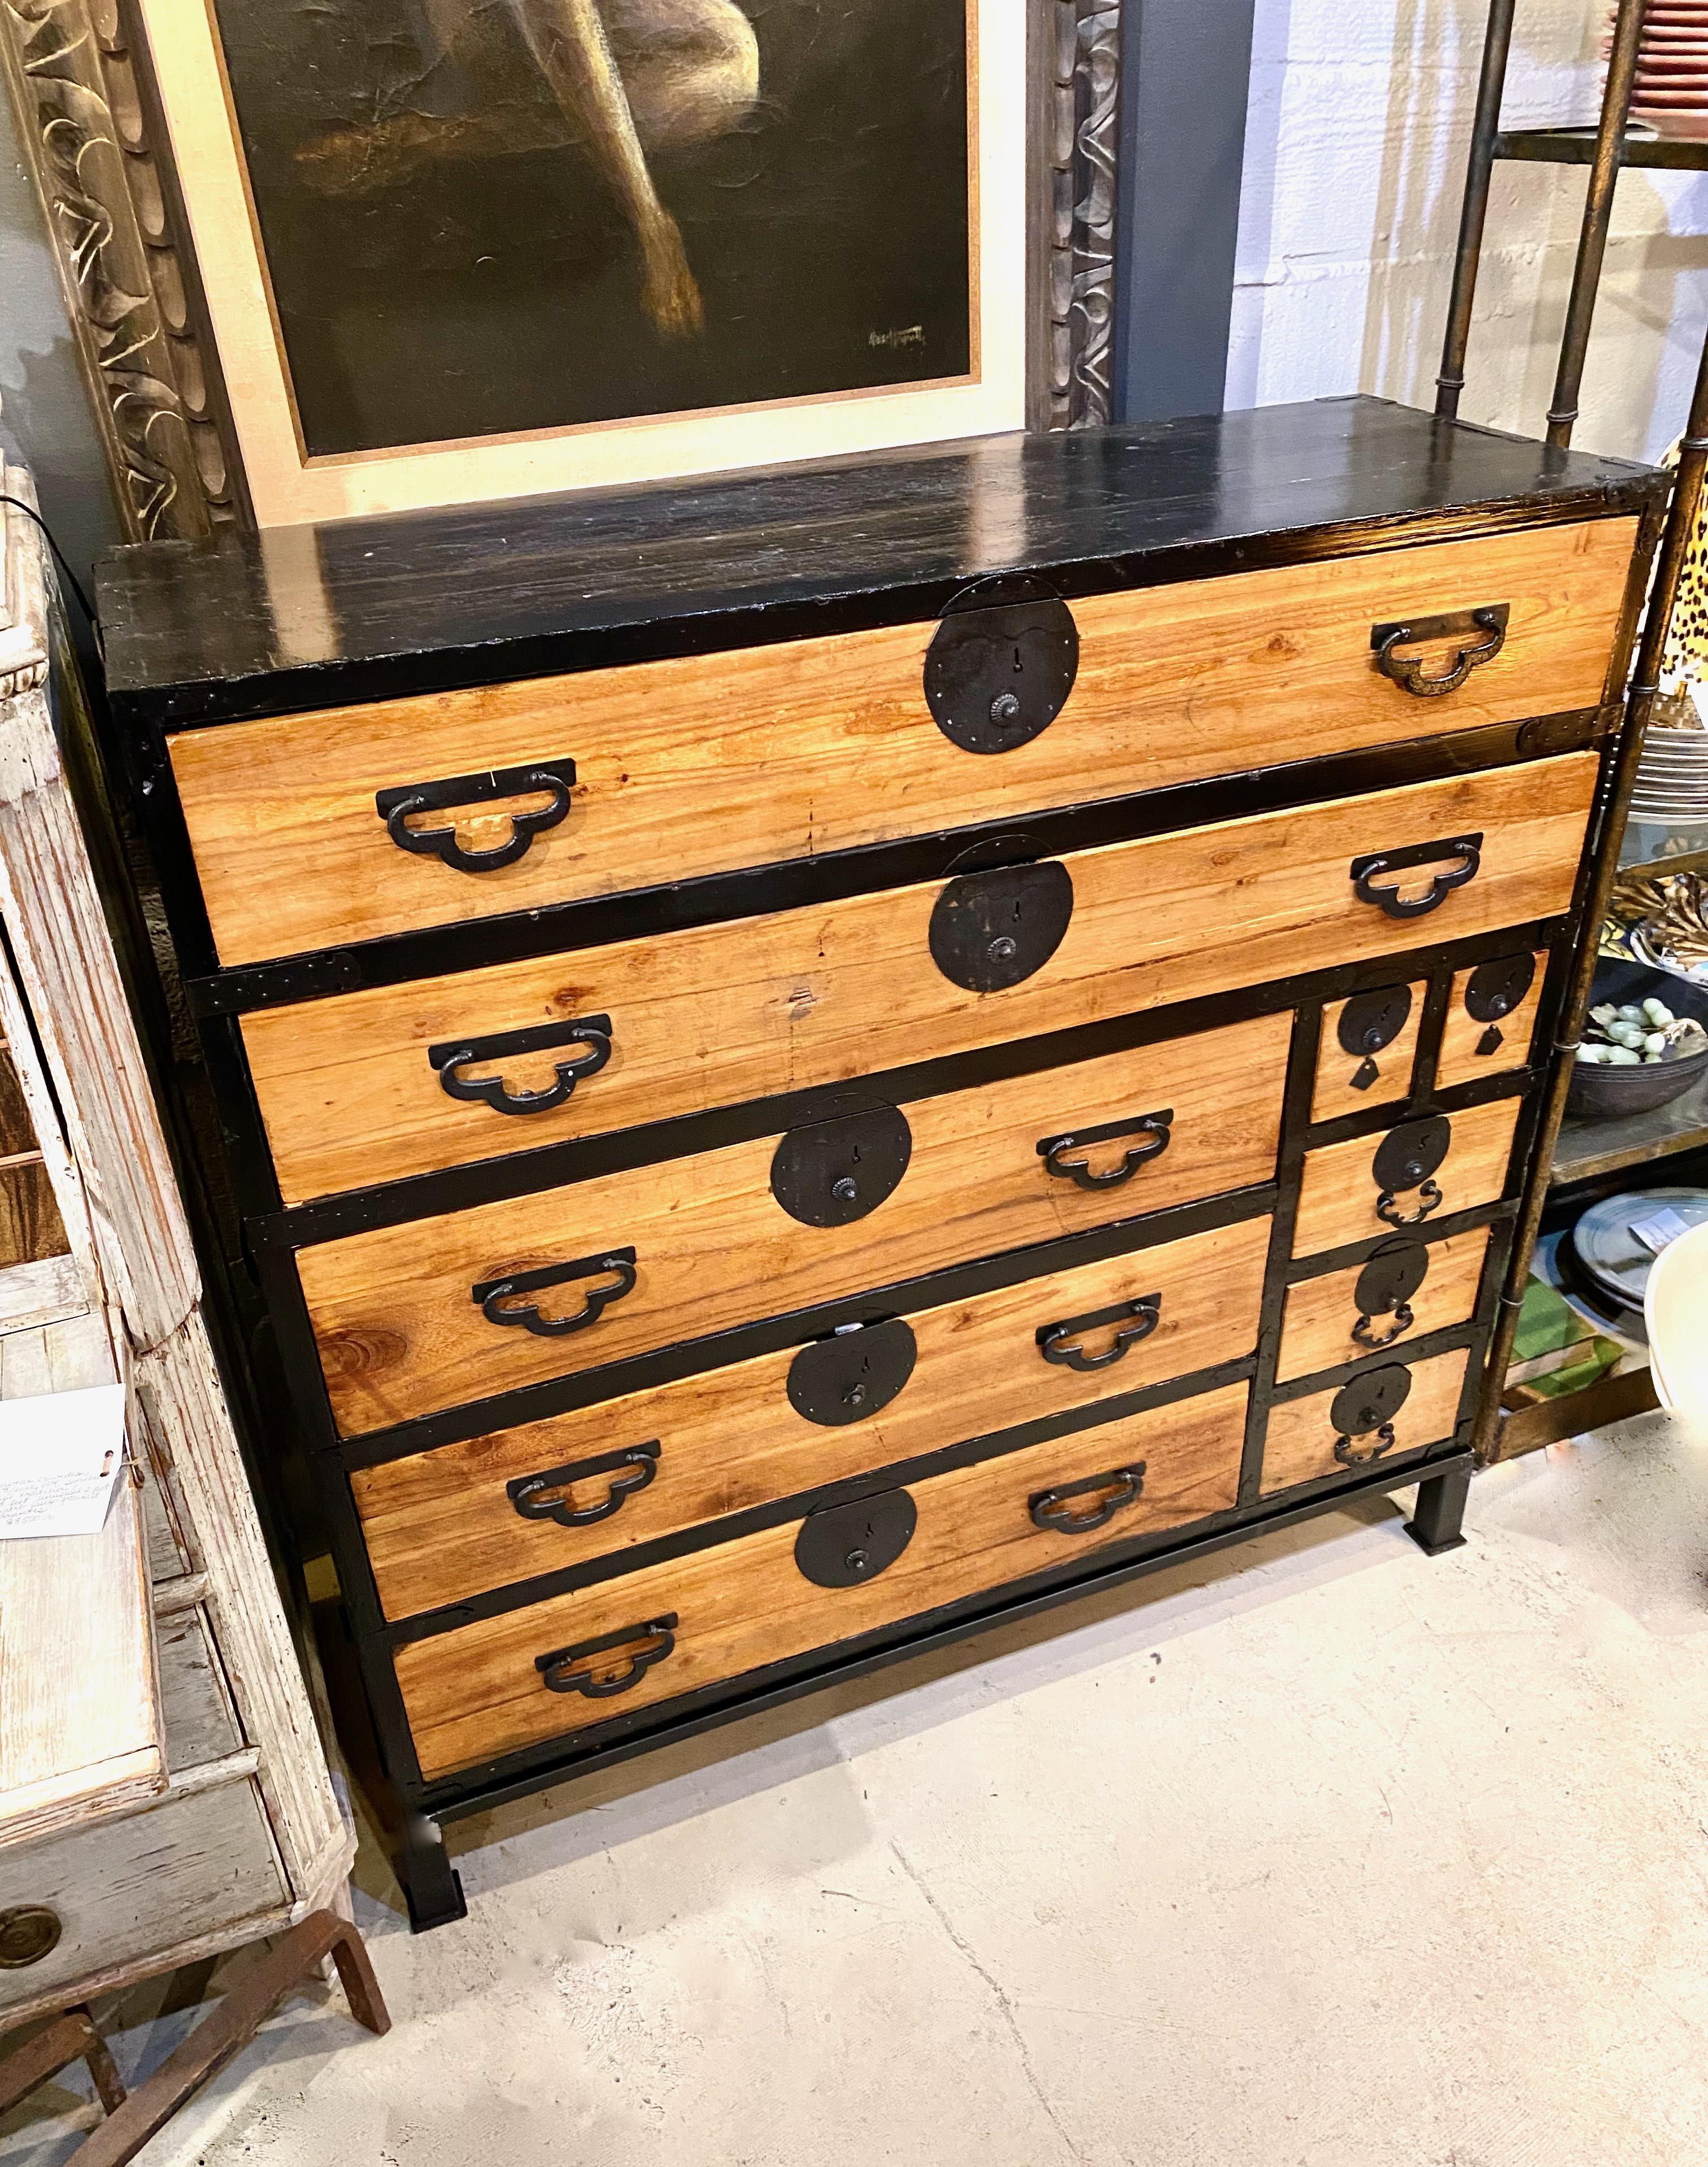 This is a very graphic Meiji Period SendaiTansu that dates to the late 19th century. The arrangement of the drawers with highlighted black separations combined with the black sides and top remind me of Mondrian. This is a handsome one-part chest